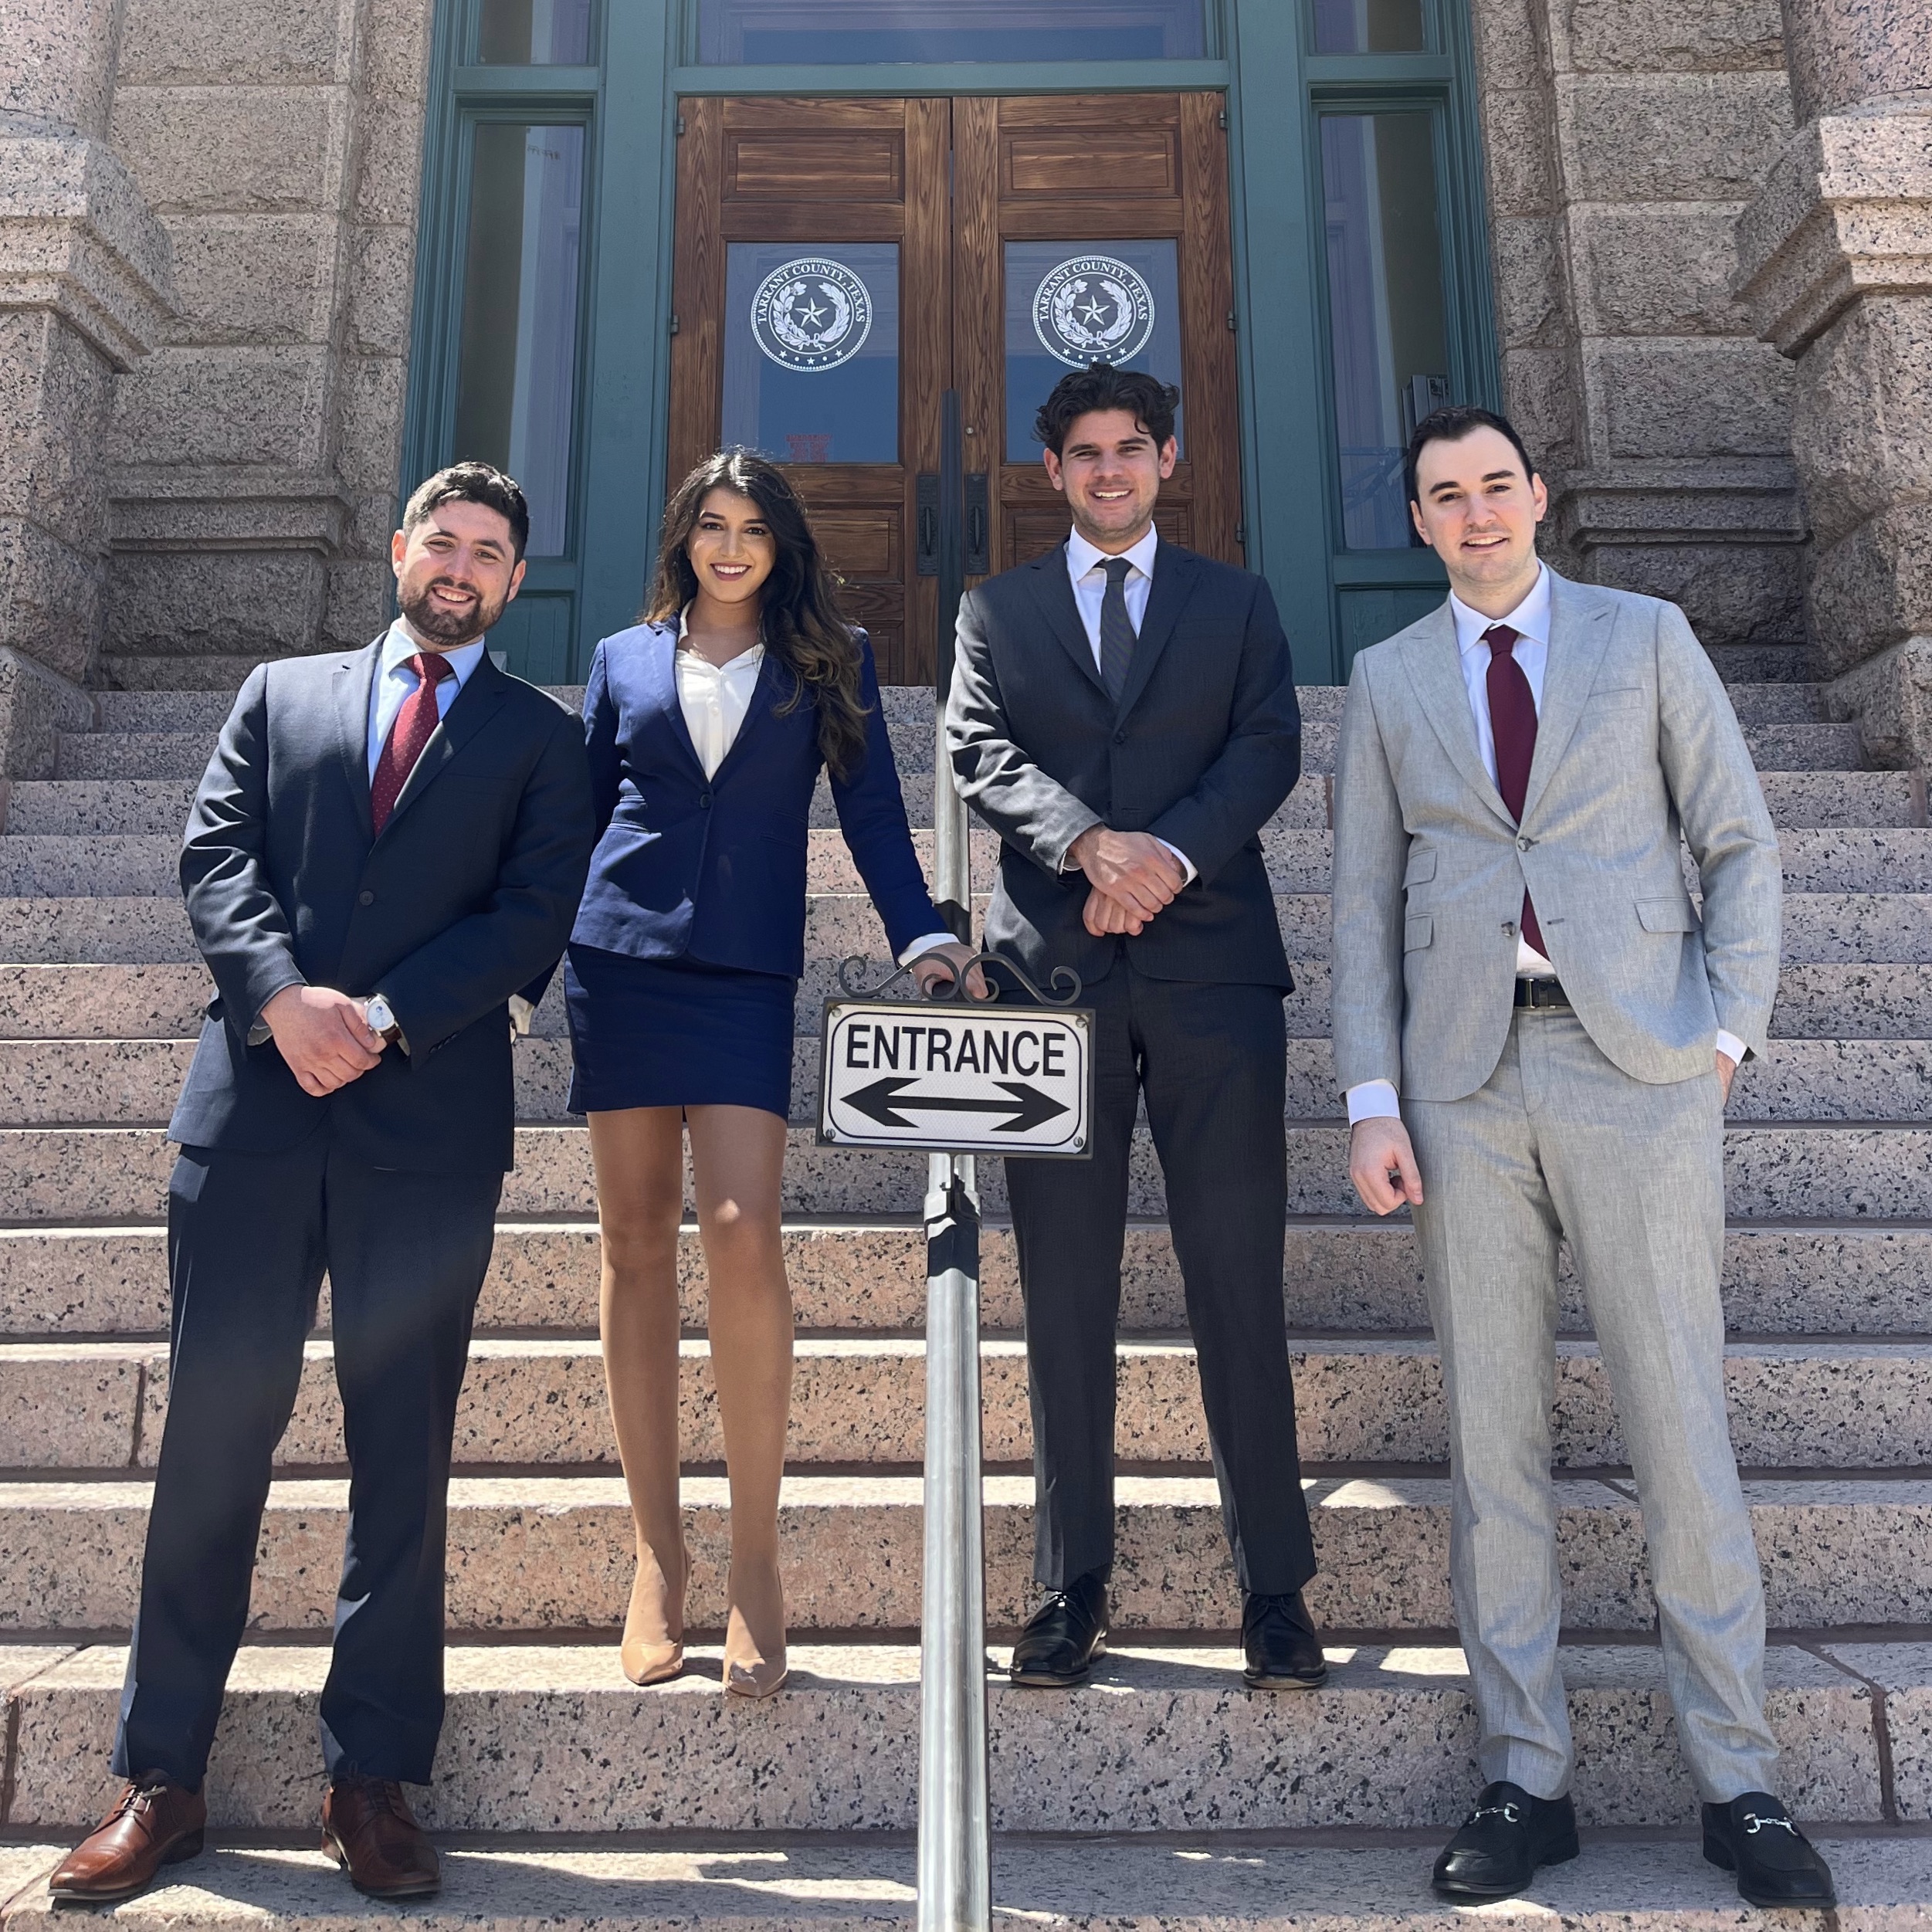 Four people wearing professional outfits smile on the steps of a courthouse.